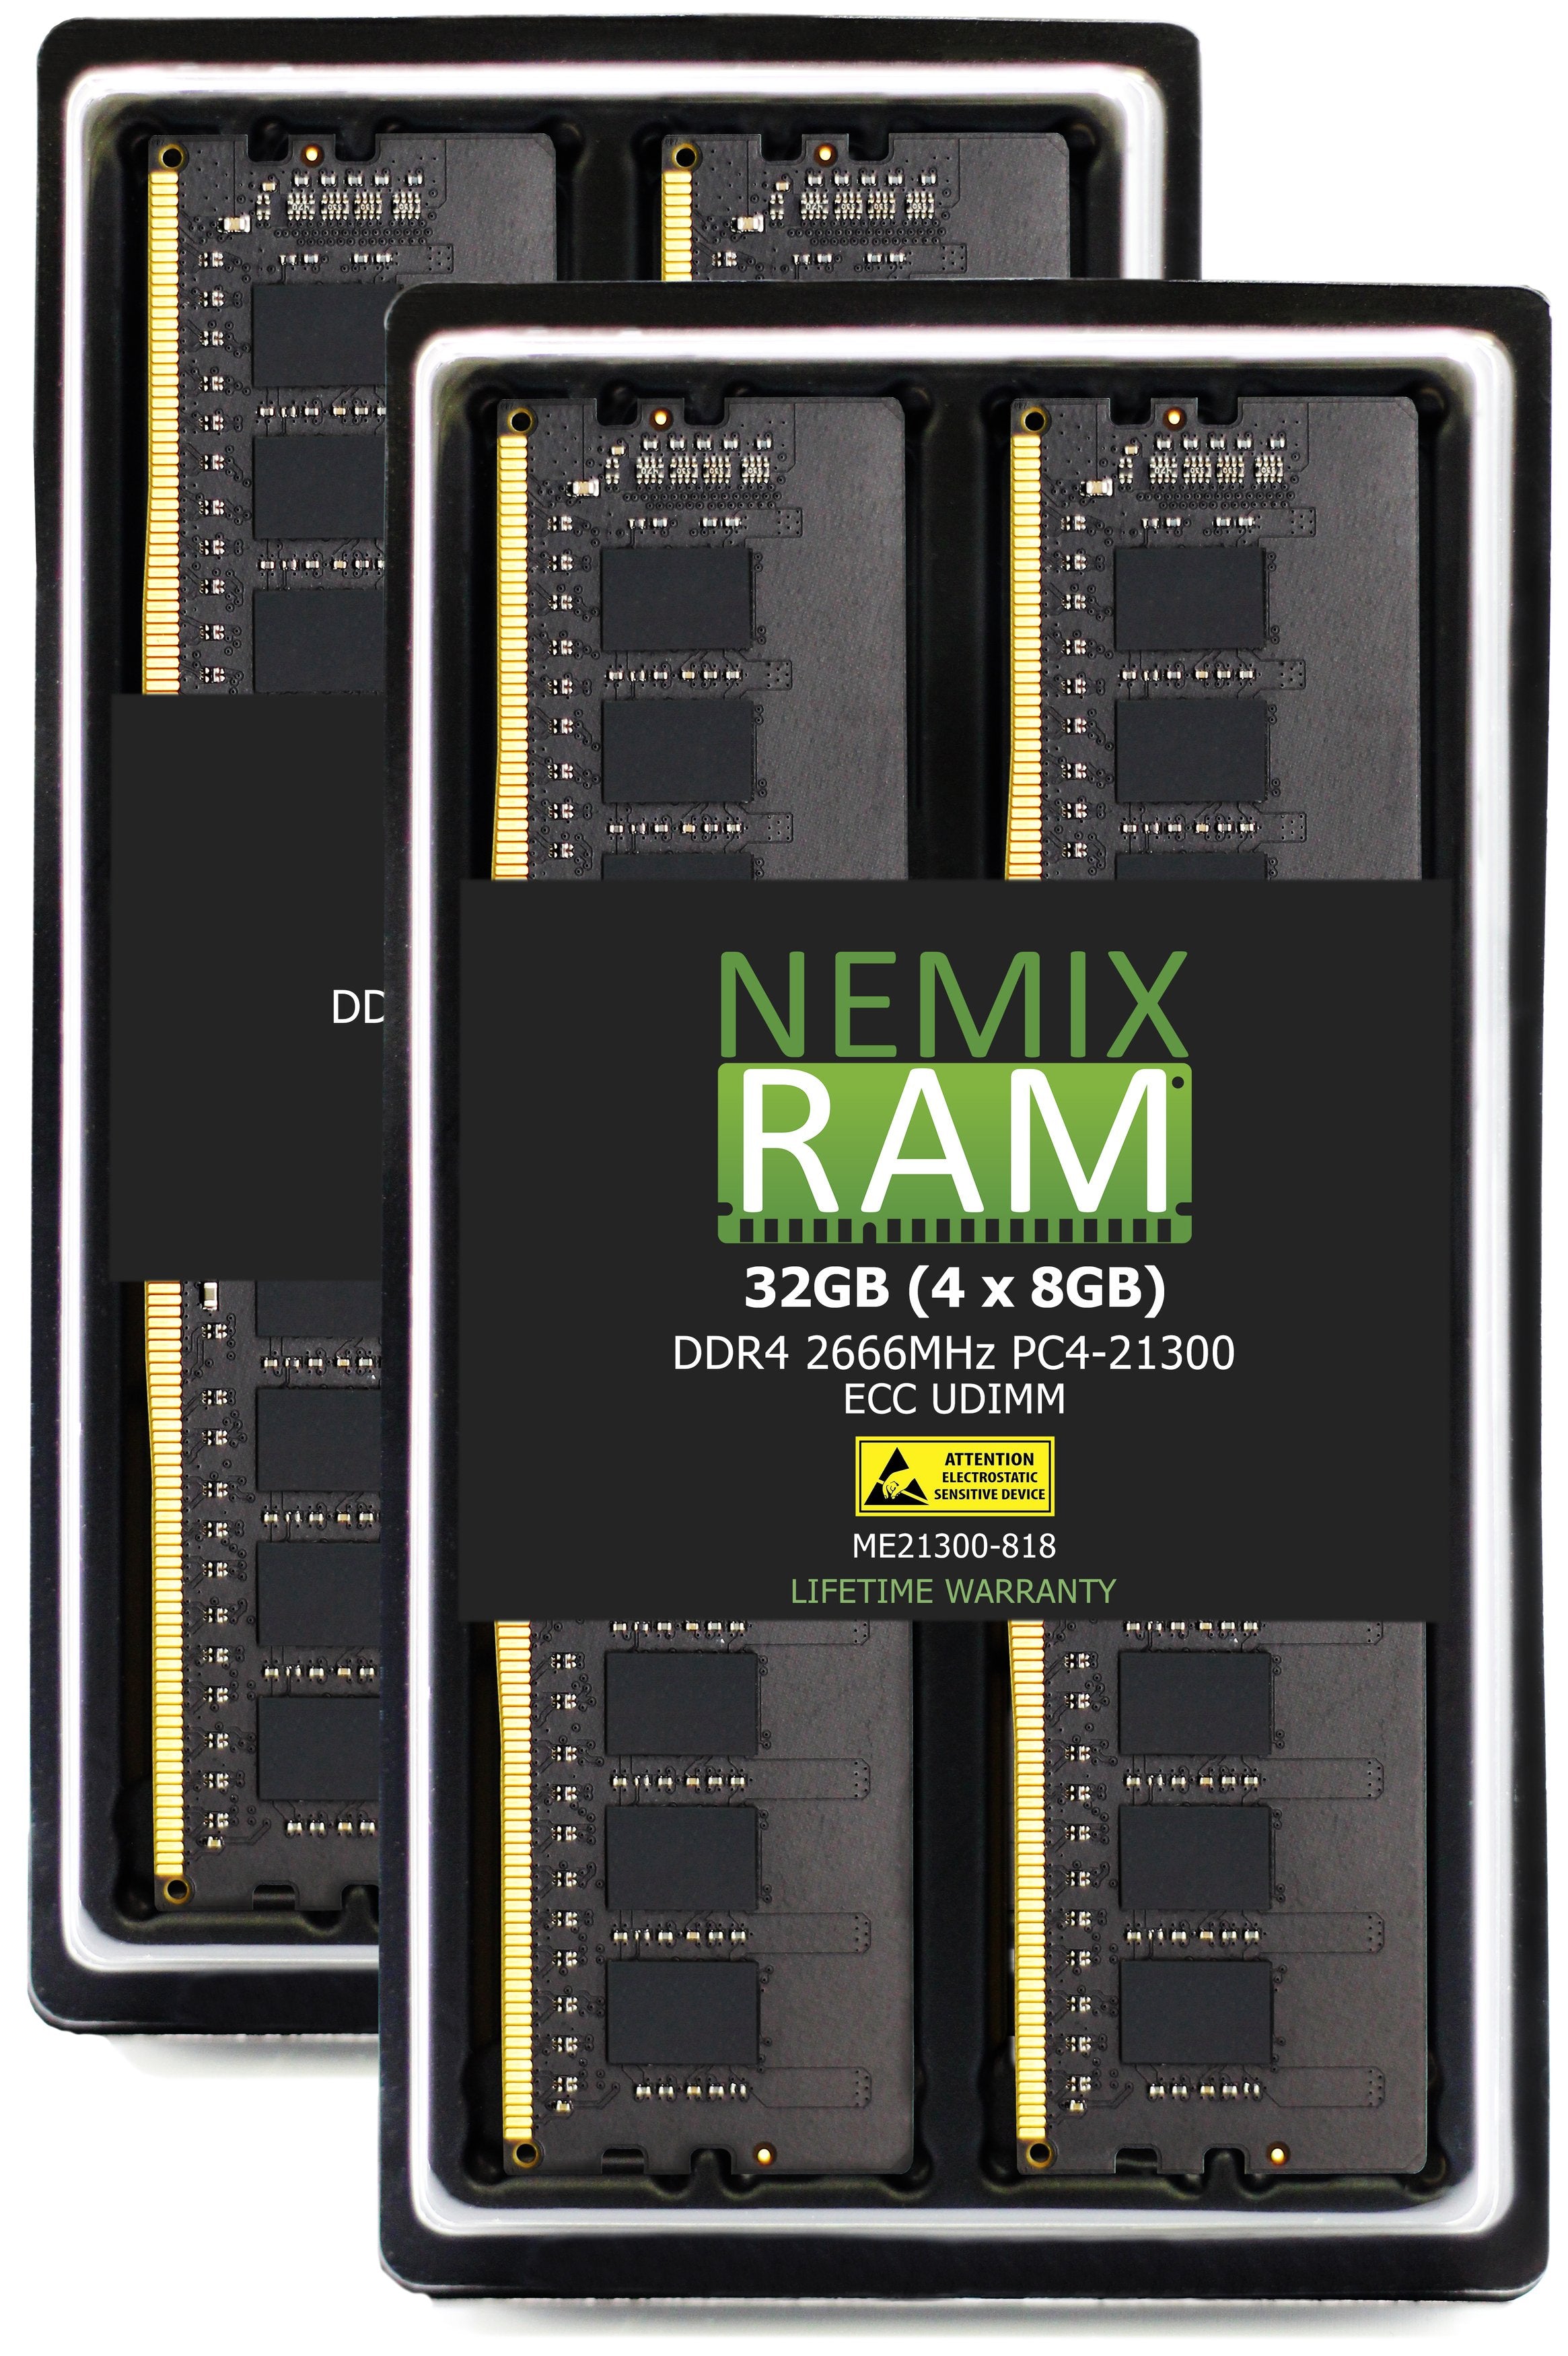 DDR4 2666MHZ PC4-21300 ECC UDIMM Compatible with Synology RackStation RS3618xs